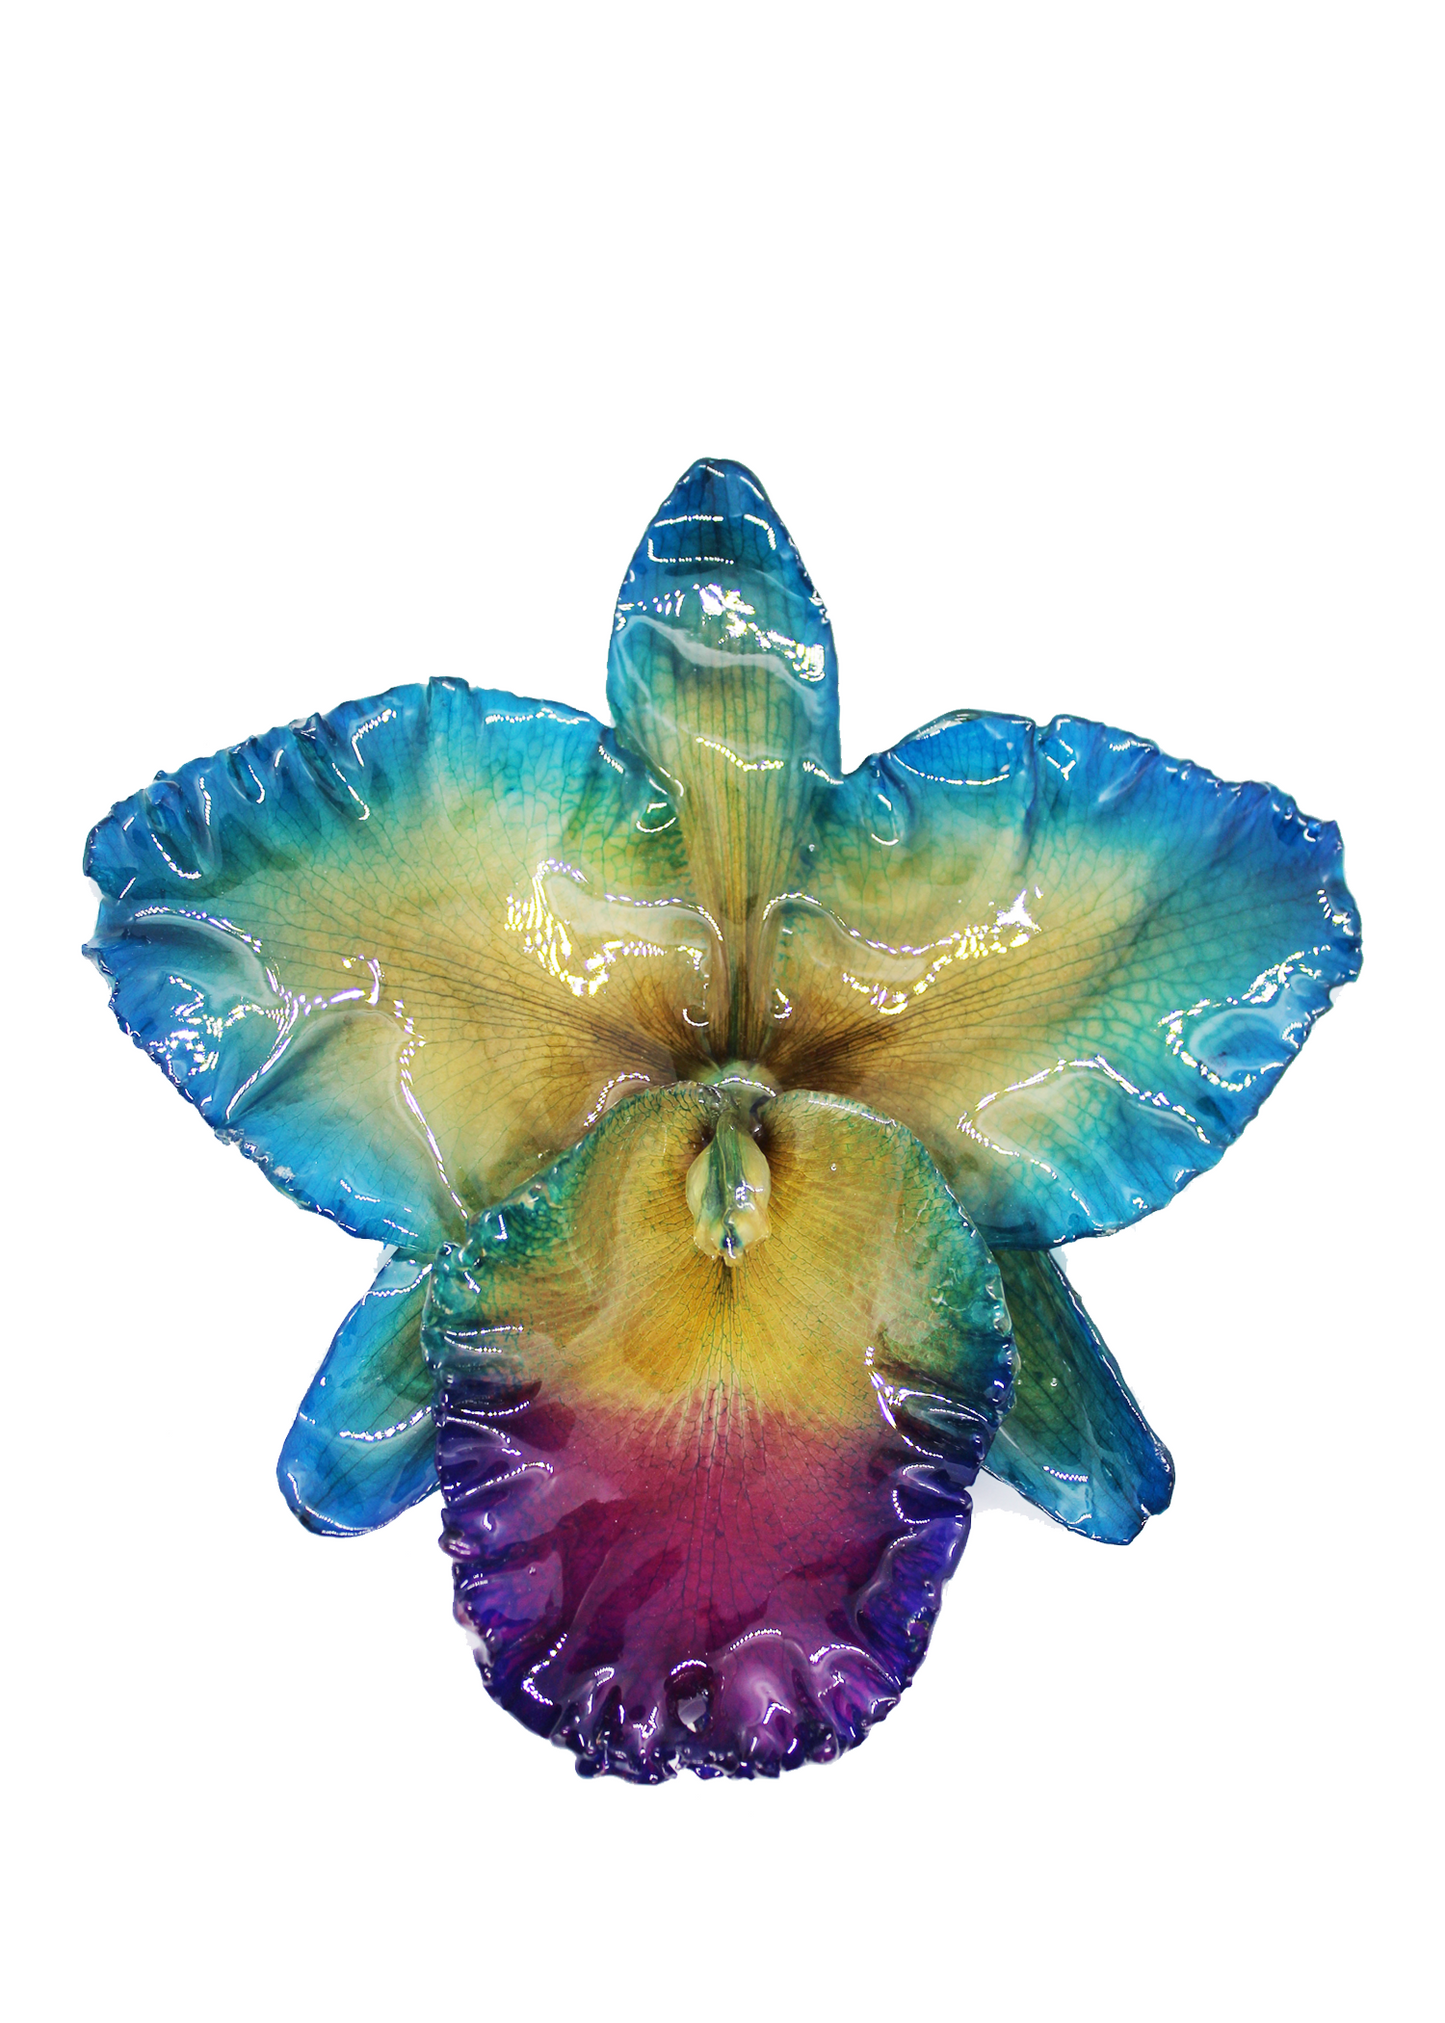 Jumbo blue, yellow, and purple orchid preserved in resin.